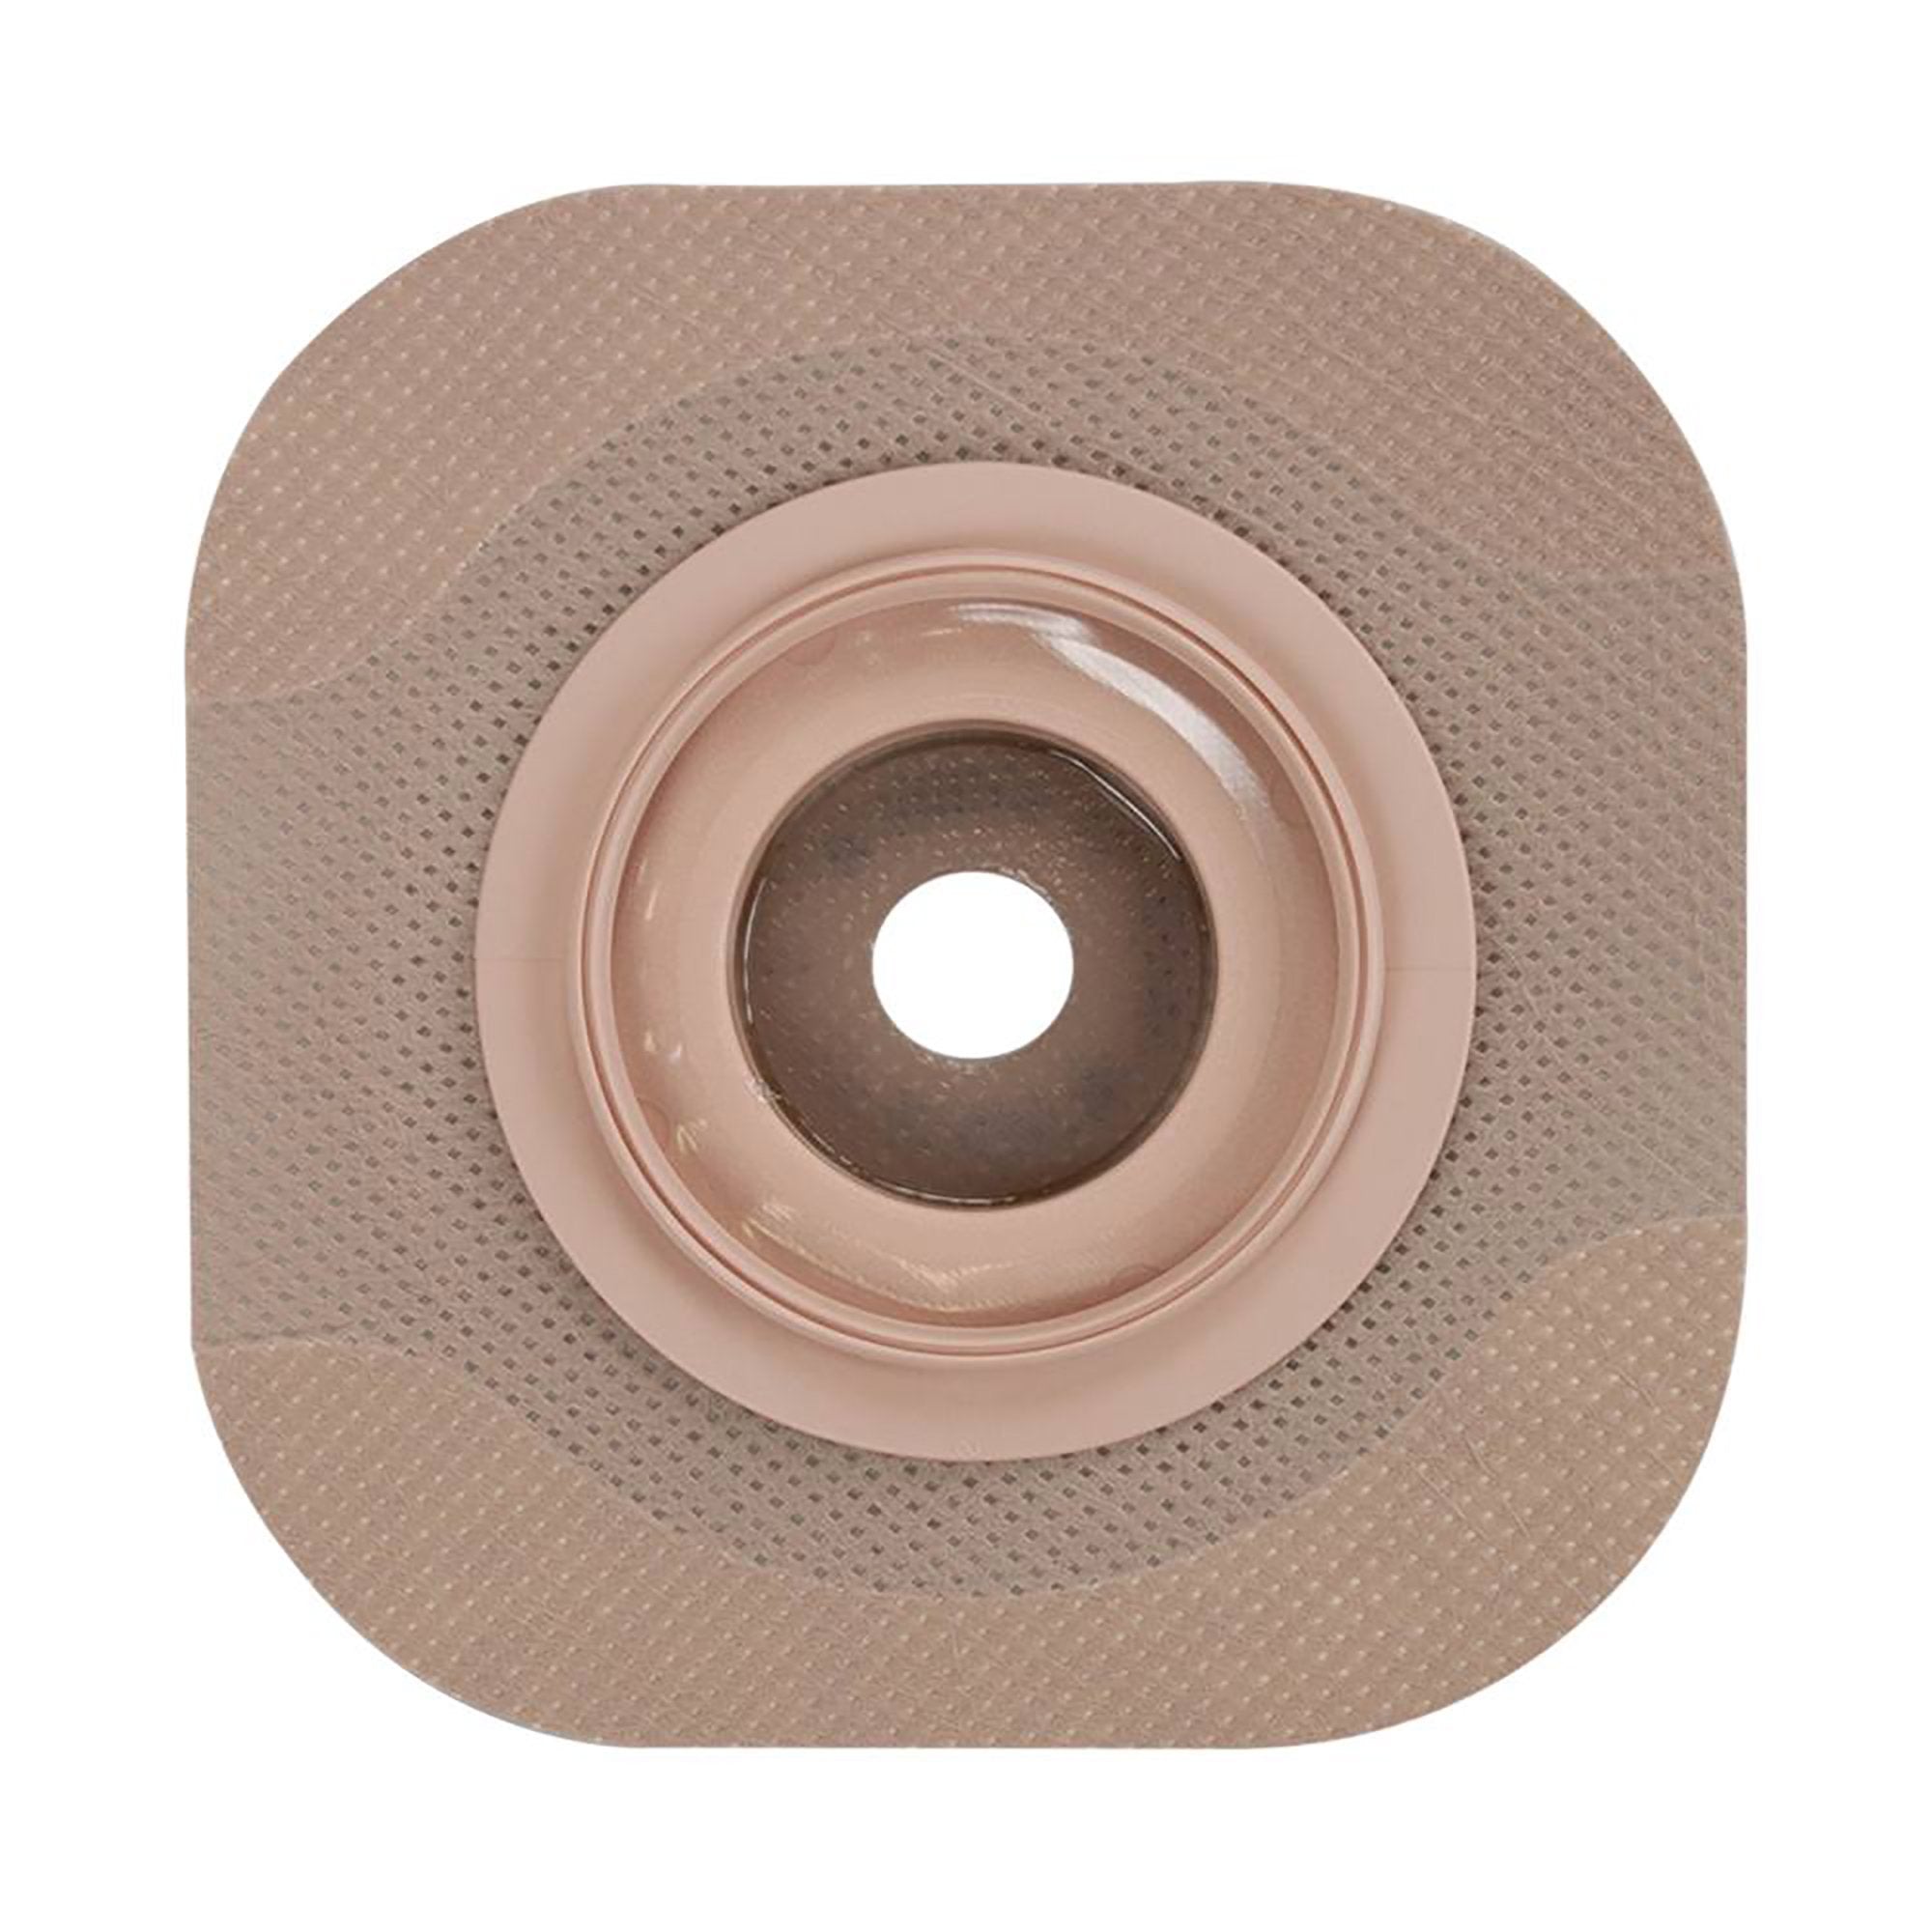 Ostomy Barrier New Image CeraPlus Trim to Fit, Extended Wear Adhesive Tape Borders 44 mm Flange Green Code System Up to 1 Inch Opening